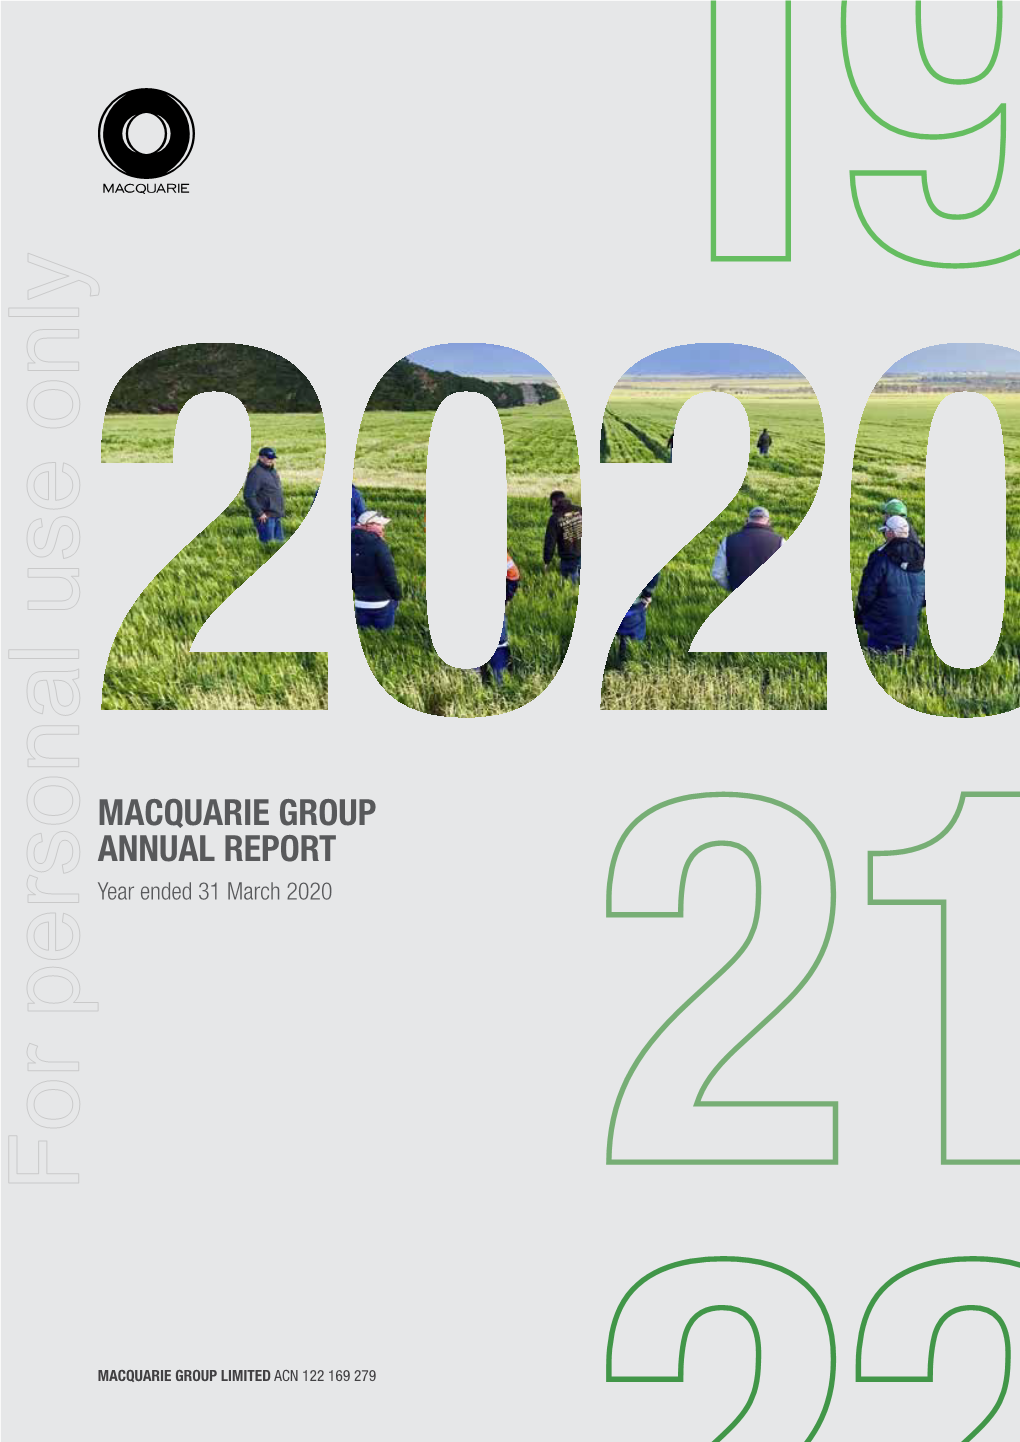 Macquarie Group Annual Report 2020